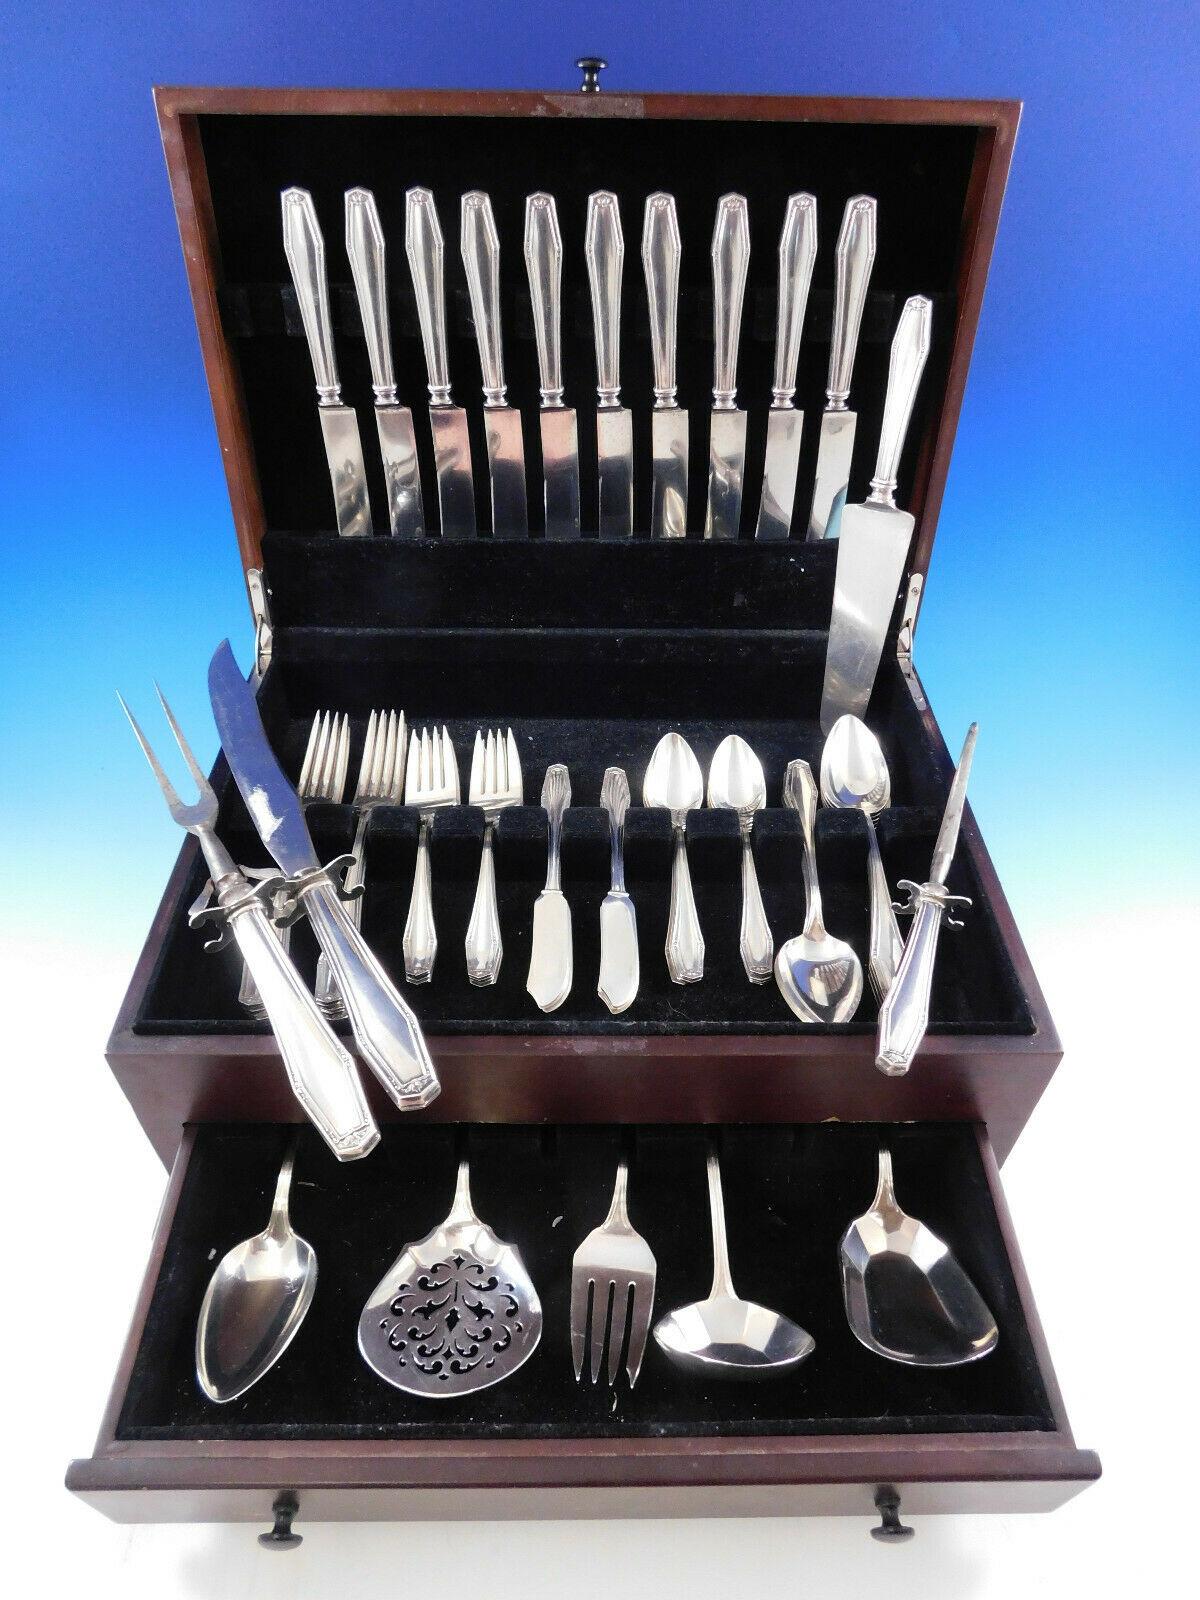 Scarce Art Deco Flanders-New by Alvin, circa 1923, sterling silver Flatware set, 70 pieces. This set includes:

10 Regular Knives, 9